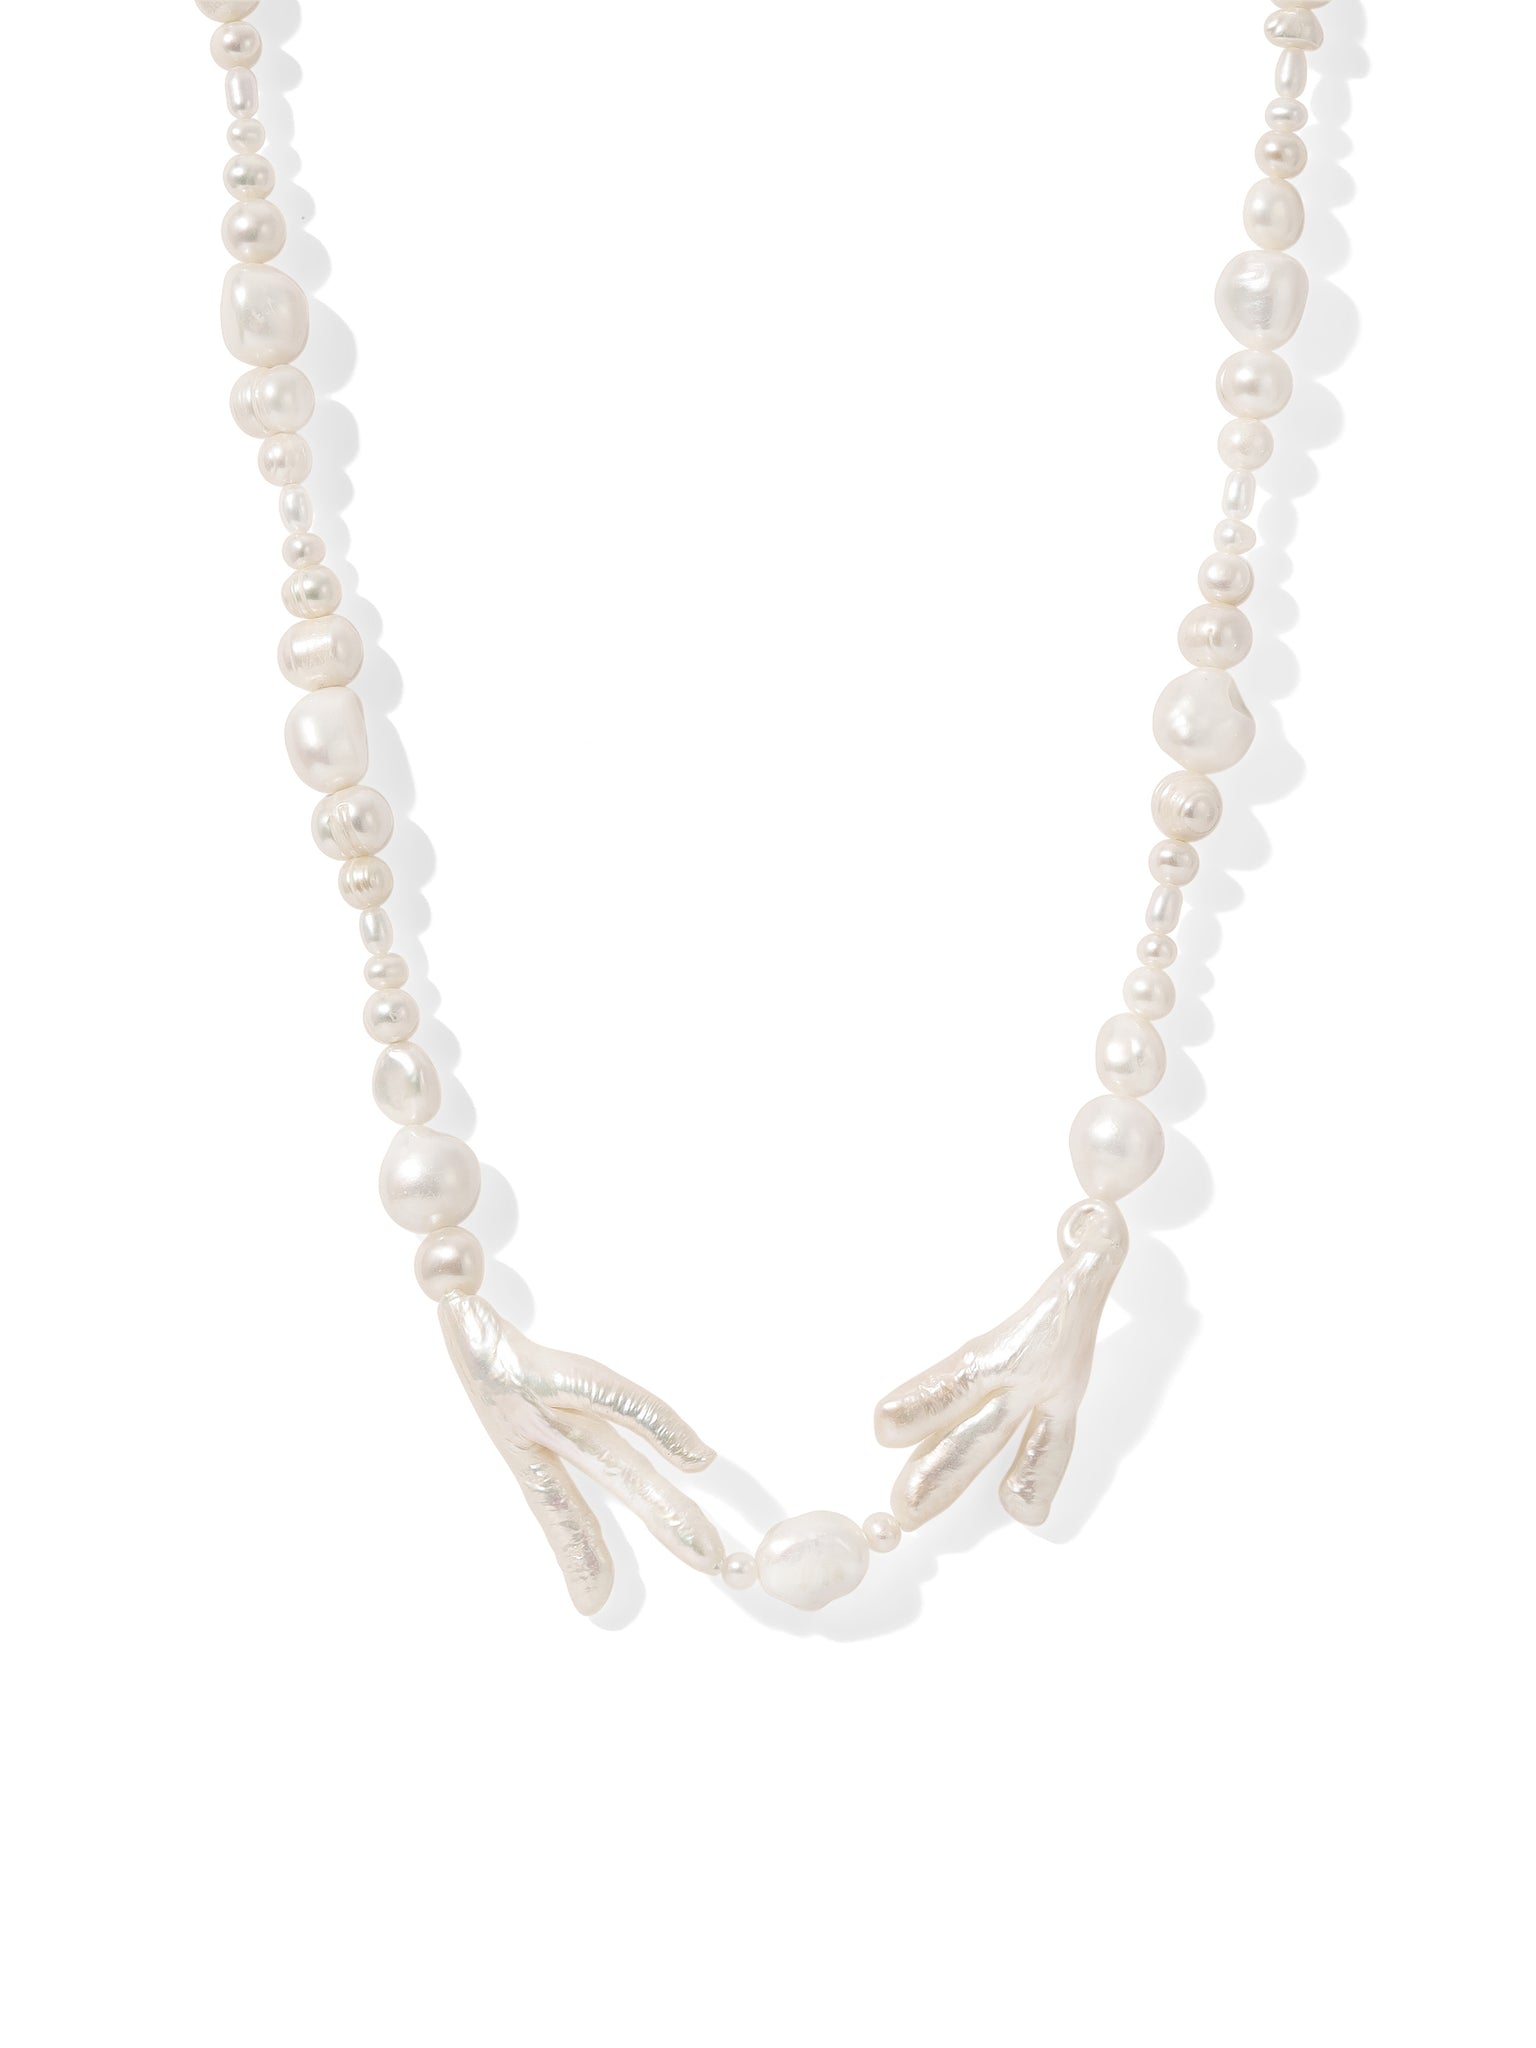 The Atlas Pearl Necklace